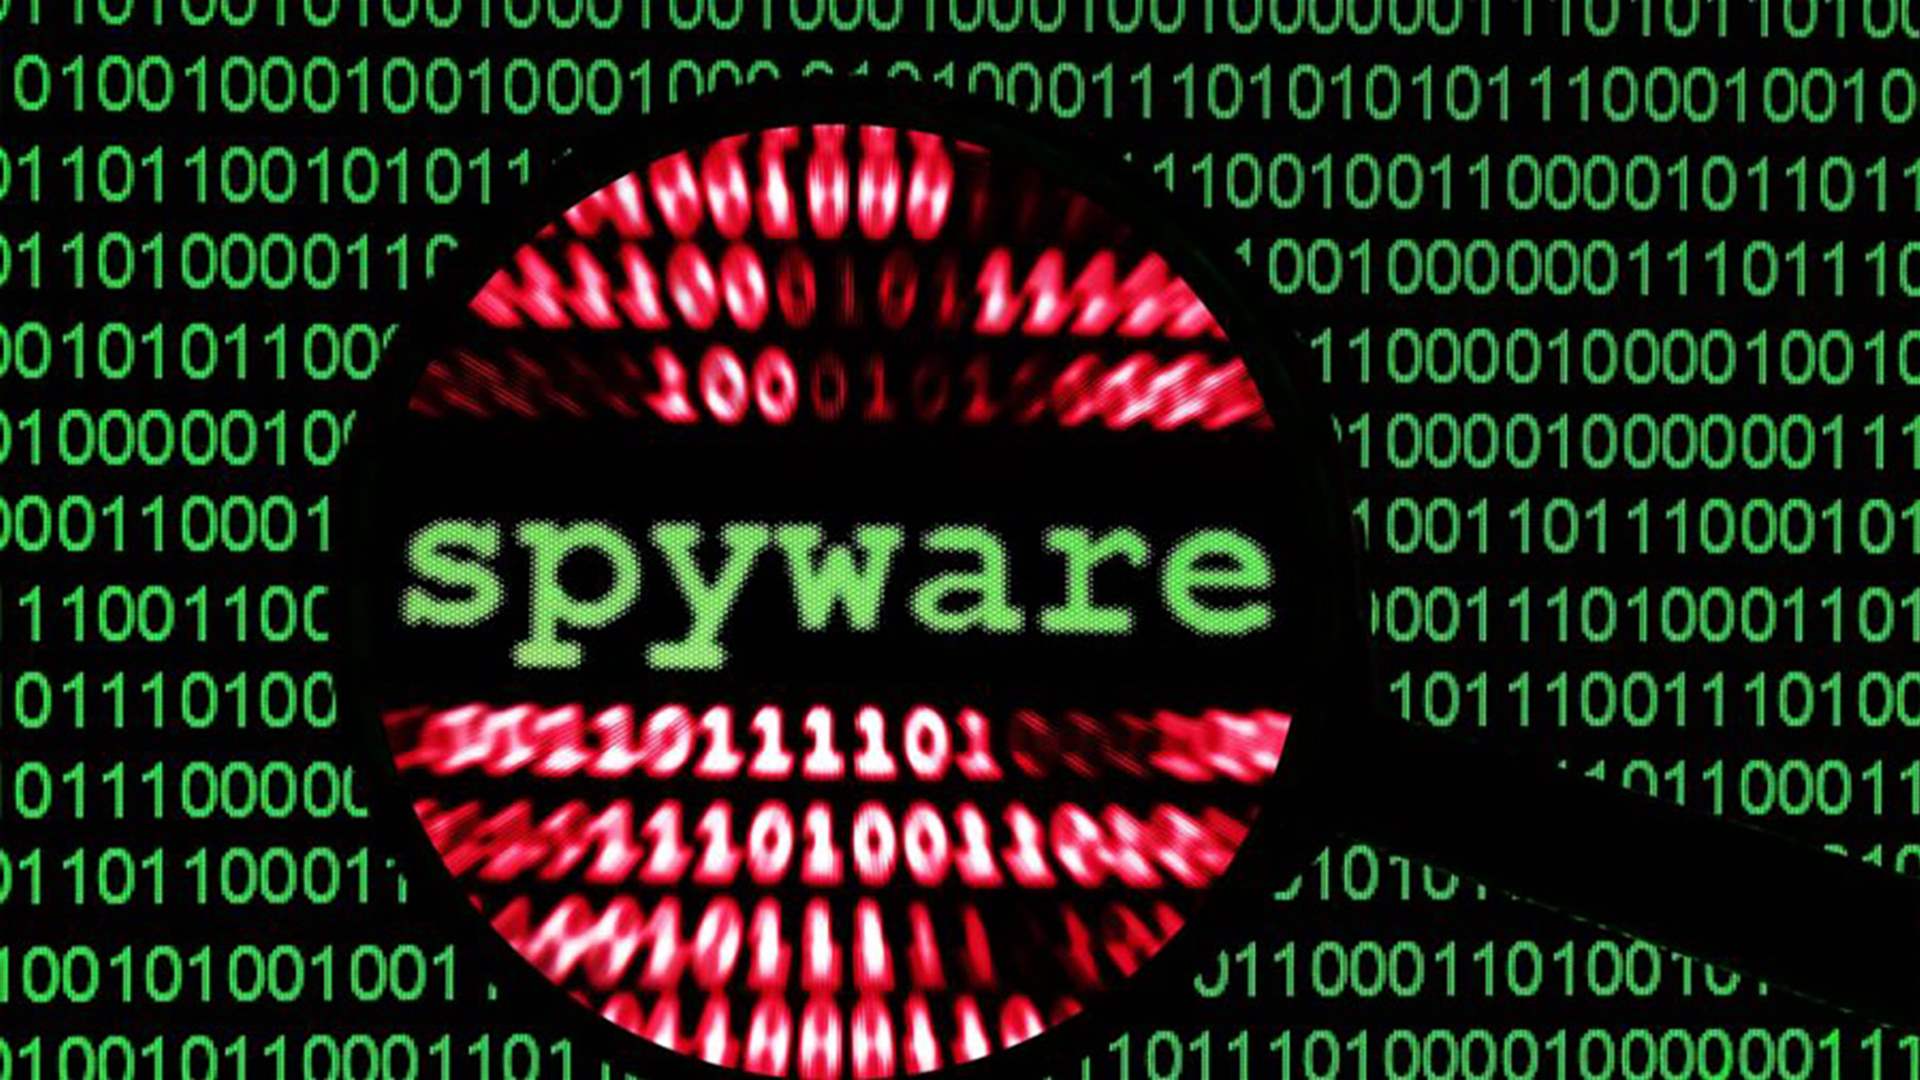 Polish senate says use of government spyware is illegal in the country